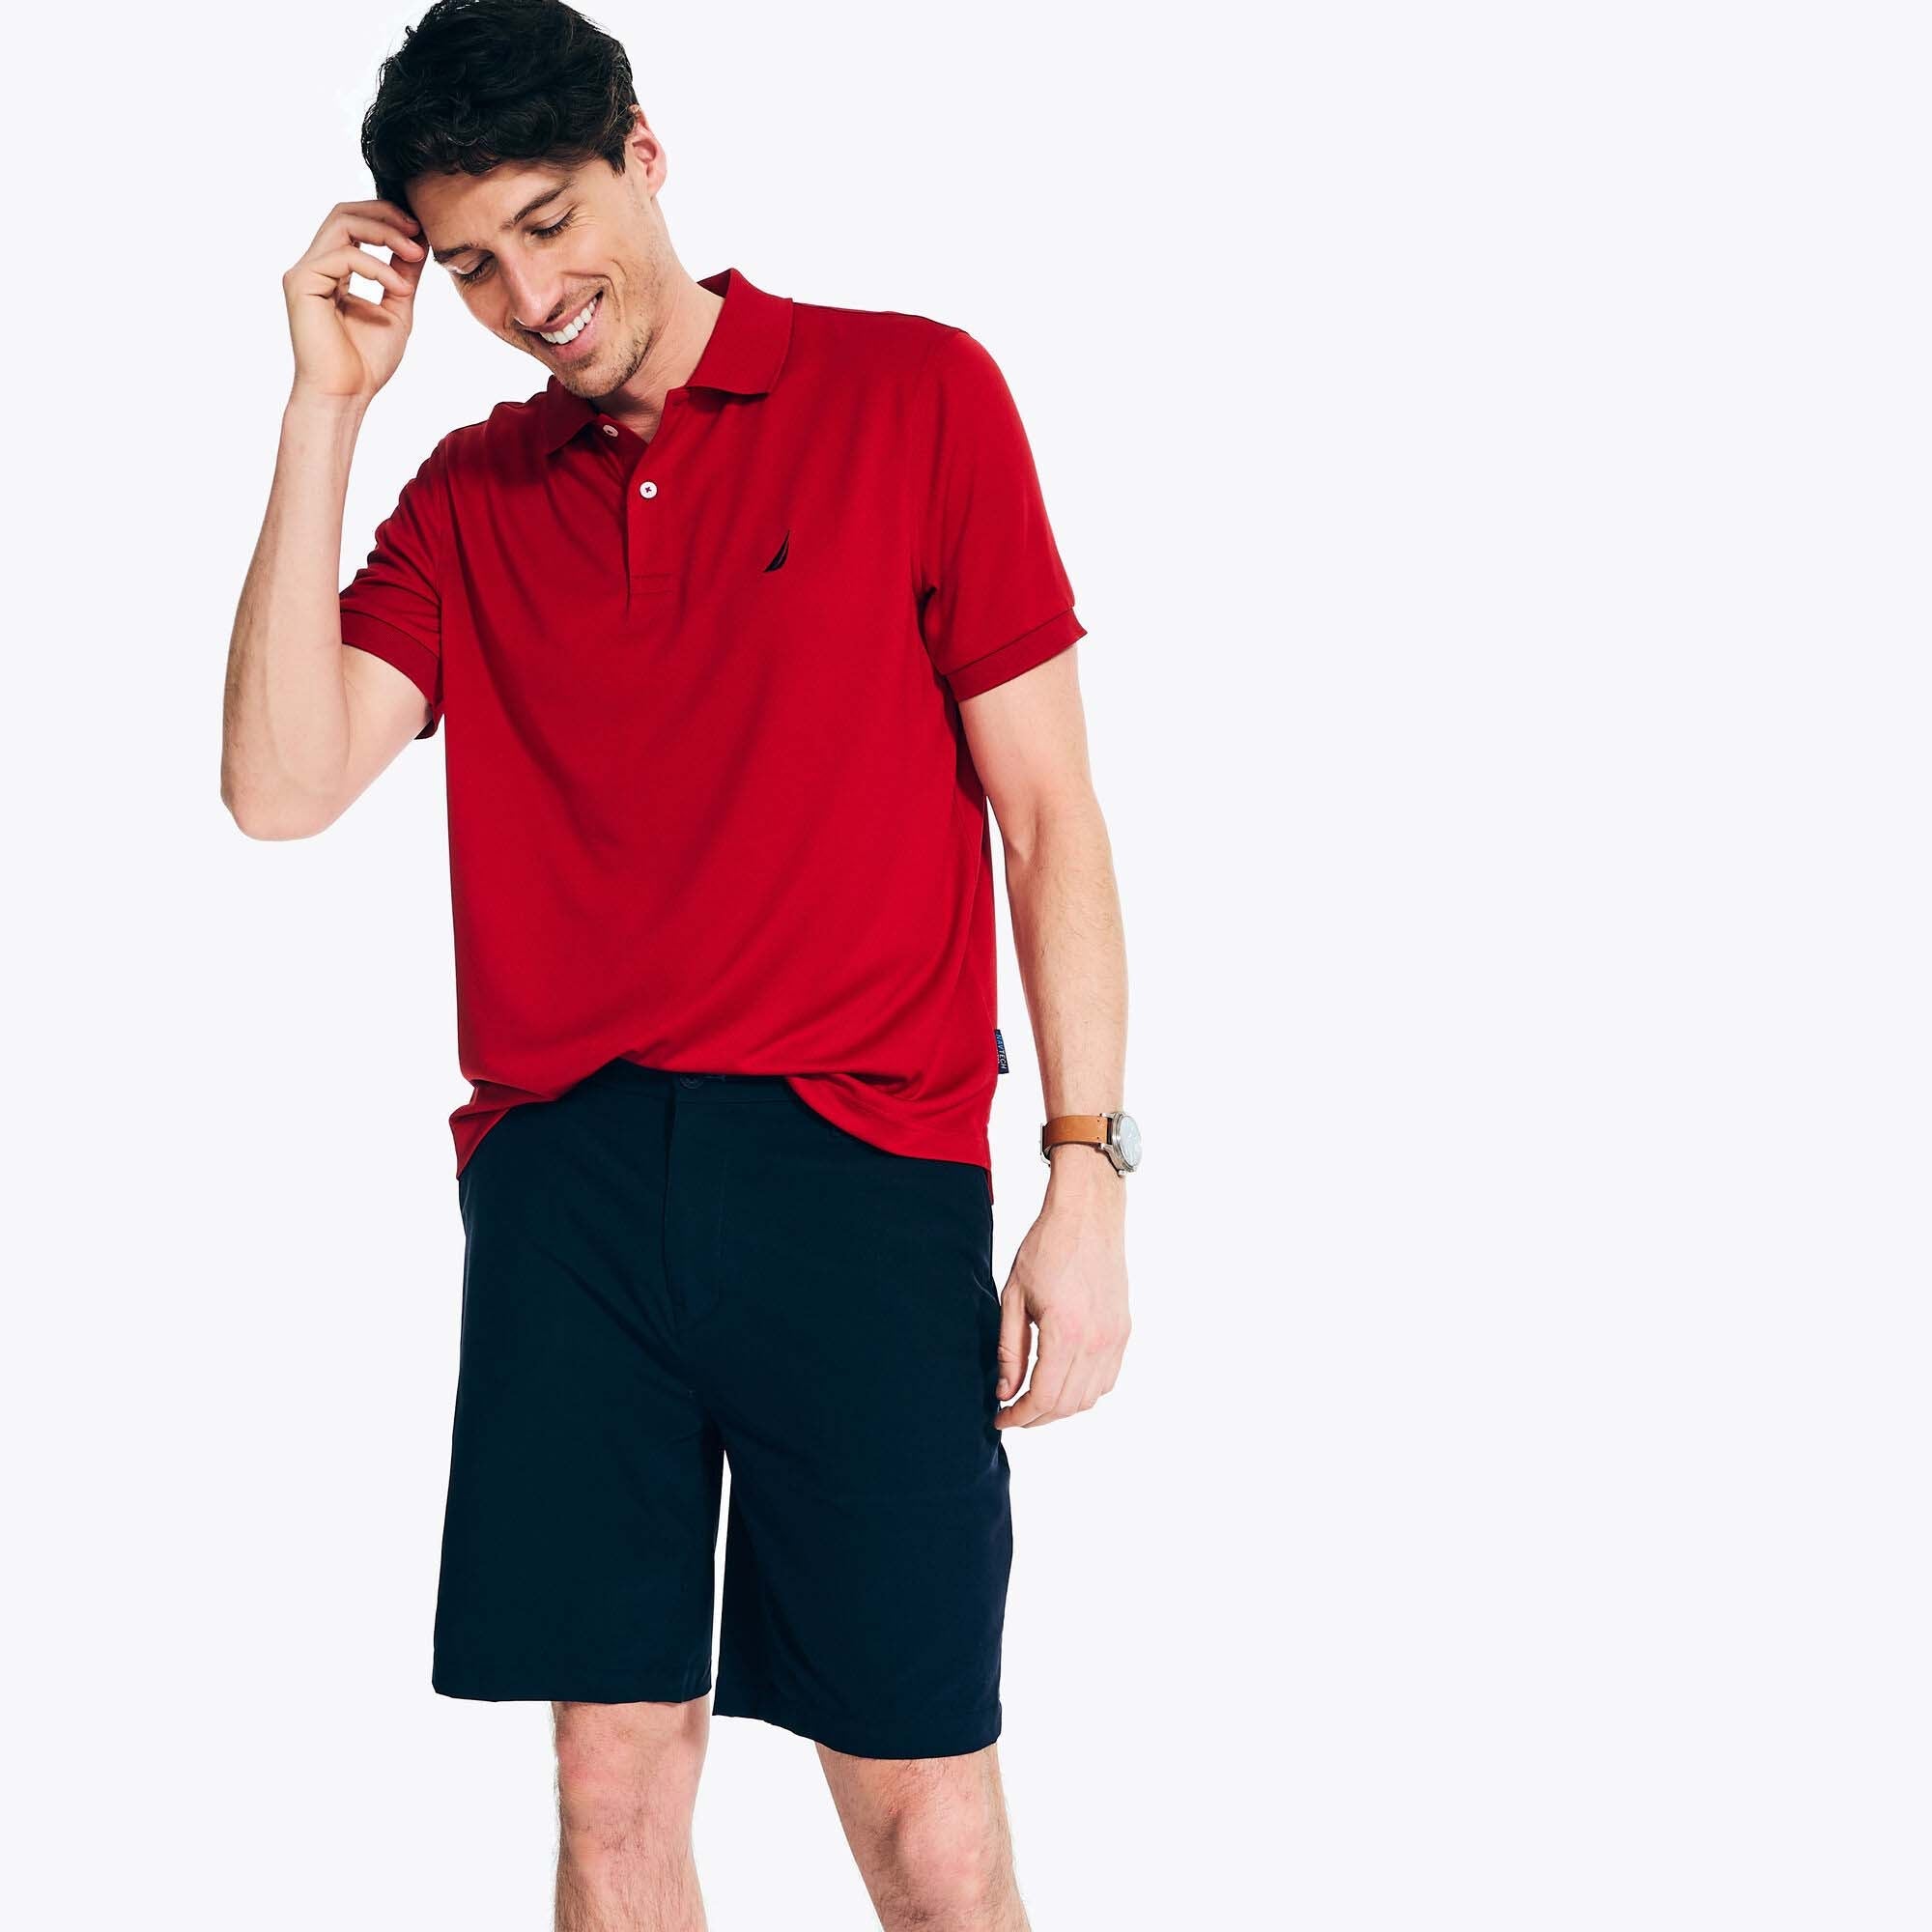 NAVTECH CLASSIC FIT PERFORMANCE POLO